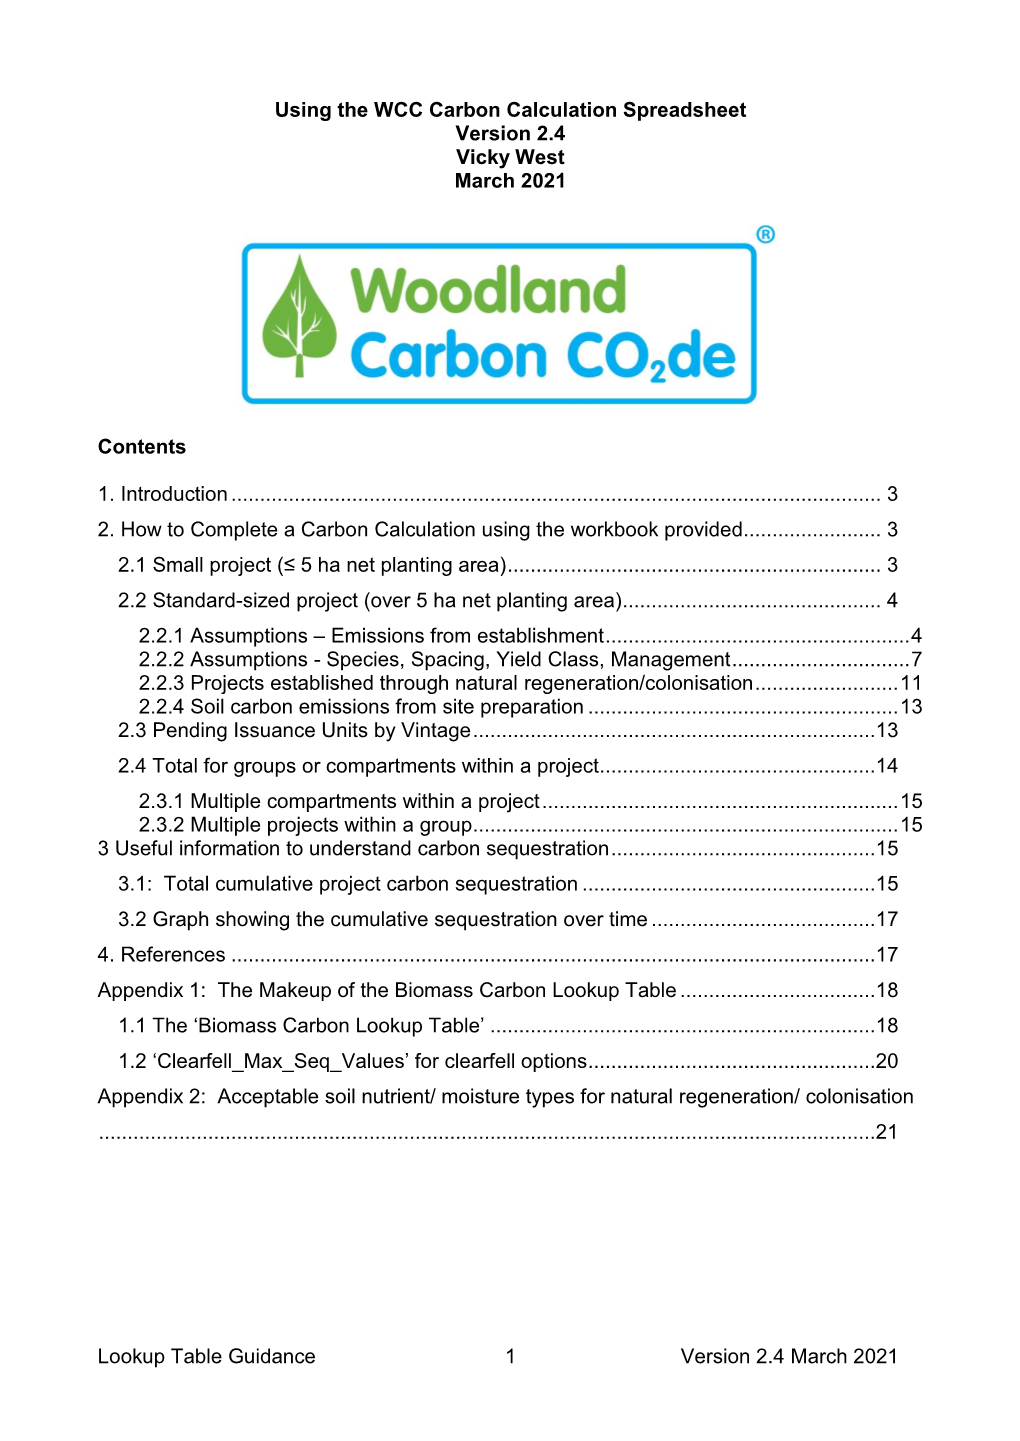 WCC Carbon Calculation Guidance V2.4 March 2021